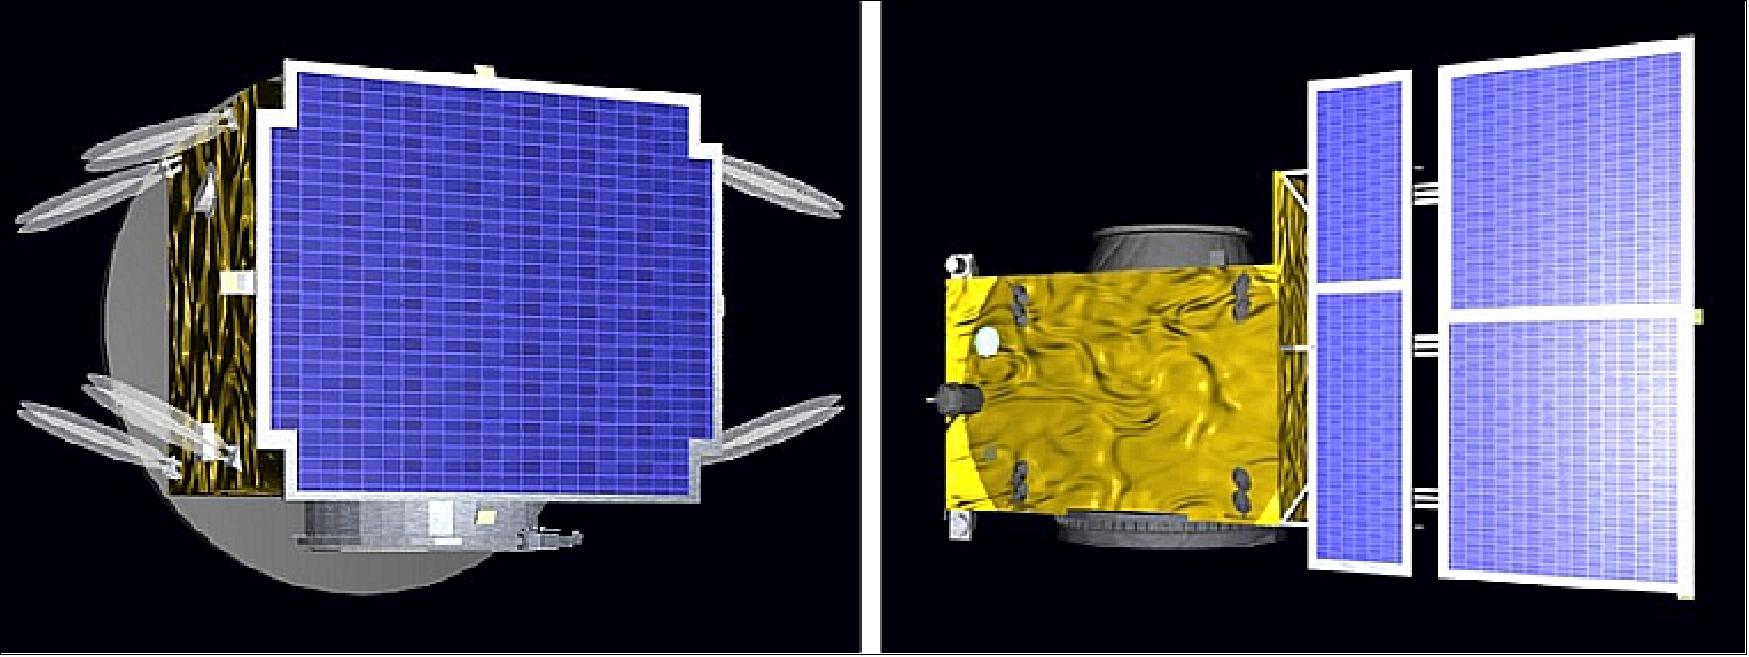 Figure 6: Illustration of the OSC (left) and of the CSC (right), image credit: PROBA-3 consortium